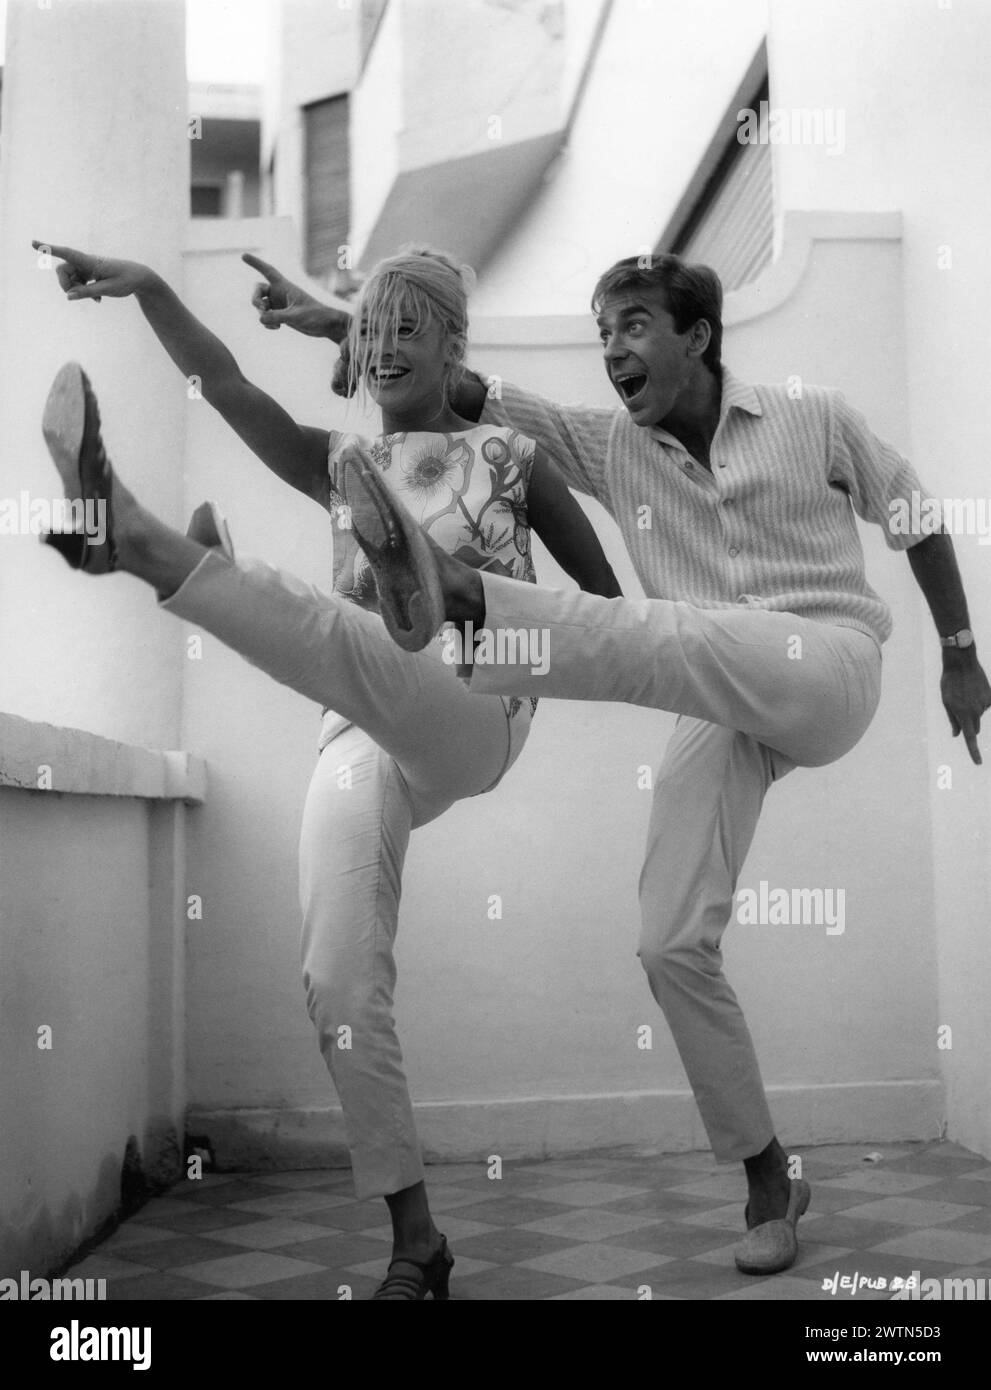 A candid photo of British Actress JULIE CHRISTIE and ROLAND CURRAM during the making of DARLING 1965  Director JOHN SCHLESINGER  Screenplay FREDERIC RAPHAEL Costume Design JULIE HARRIS Music JOHN DANKWORTH Vic-Appia Films / Anglo Amalgamated Stock Photo